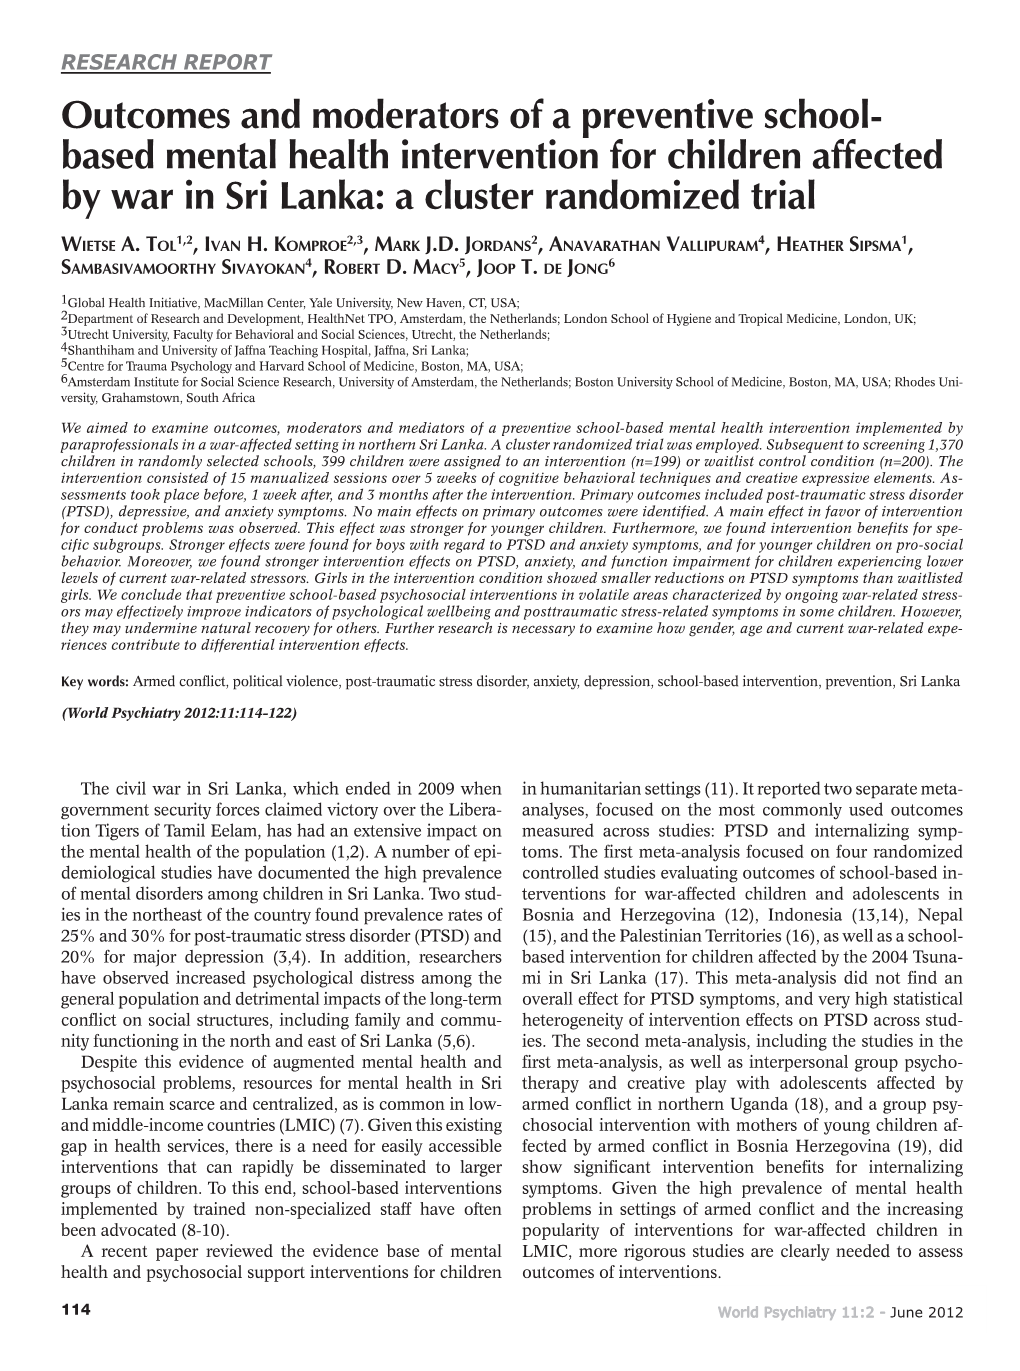 Outcomes and Moderators of a Preventive School- Based Mental Health Intervention for Children Affected by War in Sri Lanka: a Cluster Randomized Trial